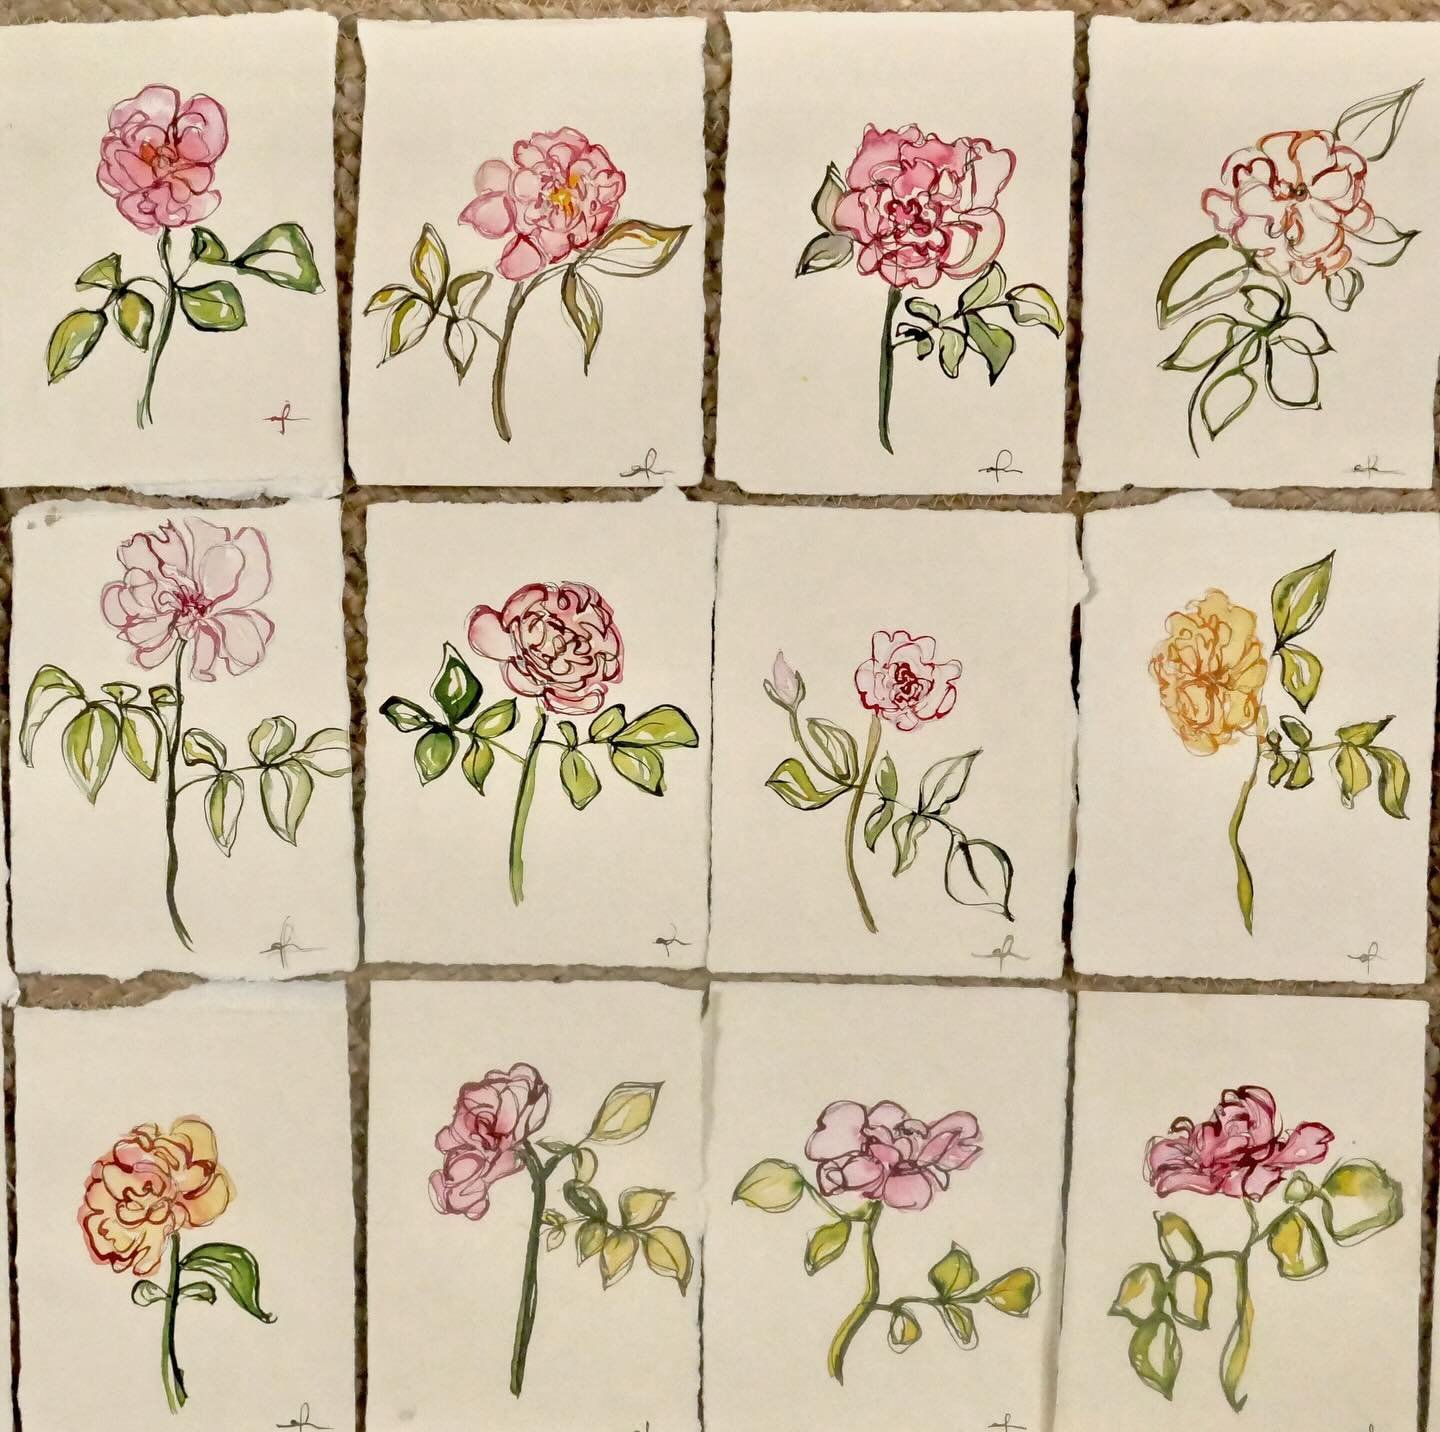 The Rose Mini&rsquo;s&hellip;inspired by the roses growing in my garden that I cannot get enough of! Dropping next Friday, 11 am CST on amyneill.com (link in bio) 

#amyneillart #roseart #roses
#springgarden #davidaustinroses #davidaustin #rosegarden